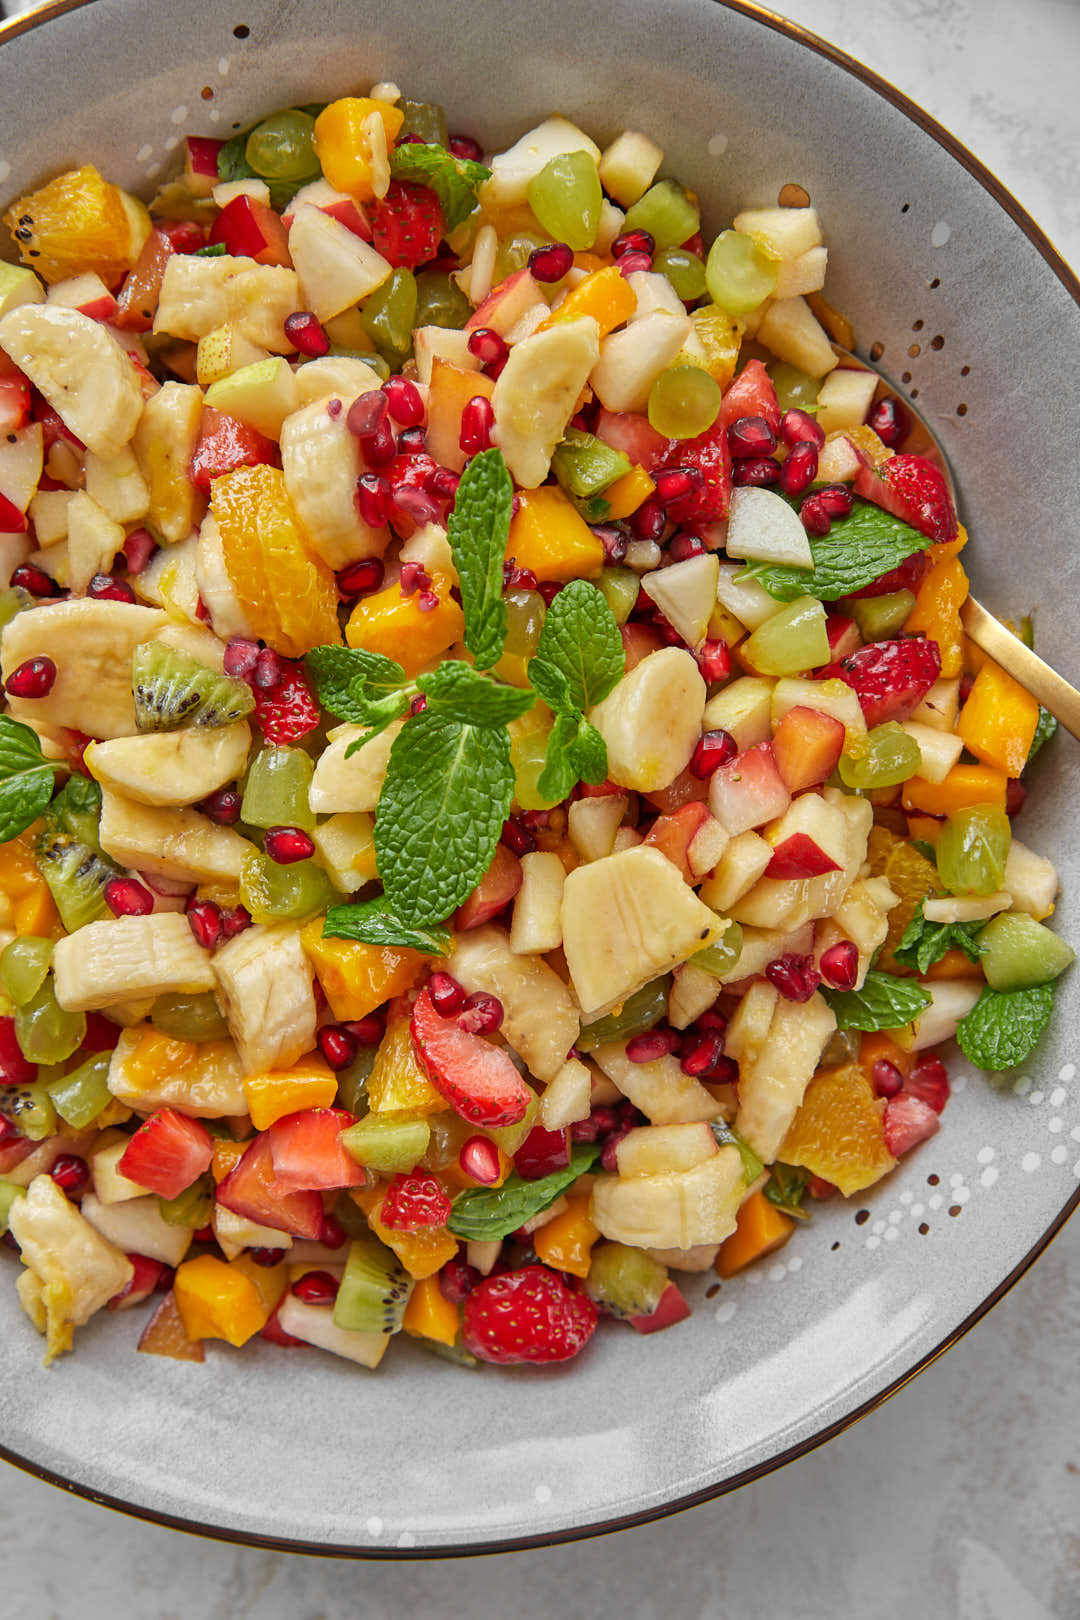 zoomed in photo of fruit salad in large gray bowl.